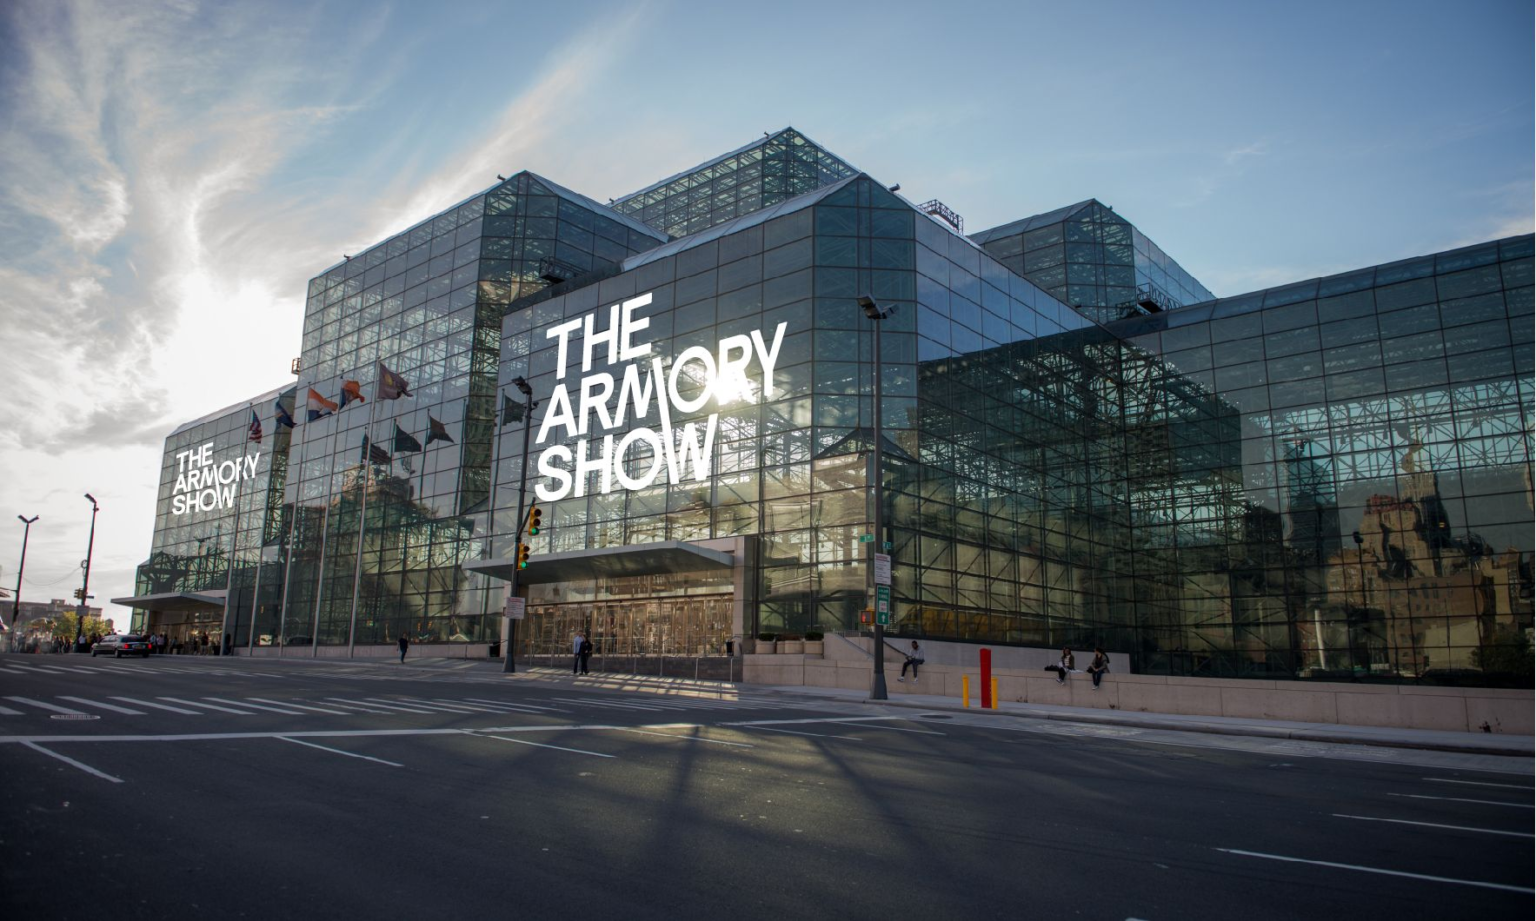 The Armory Show’s 2022 edition will have a distinct focus on Latin American art